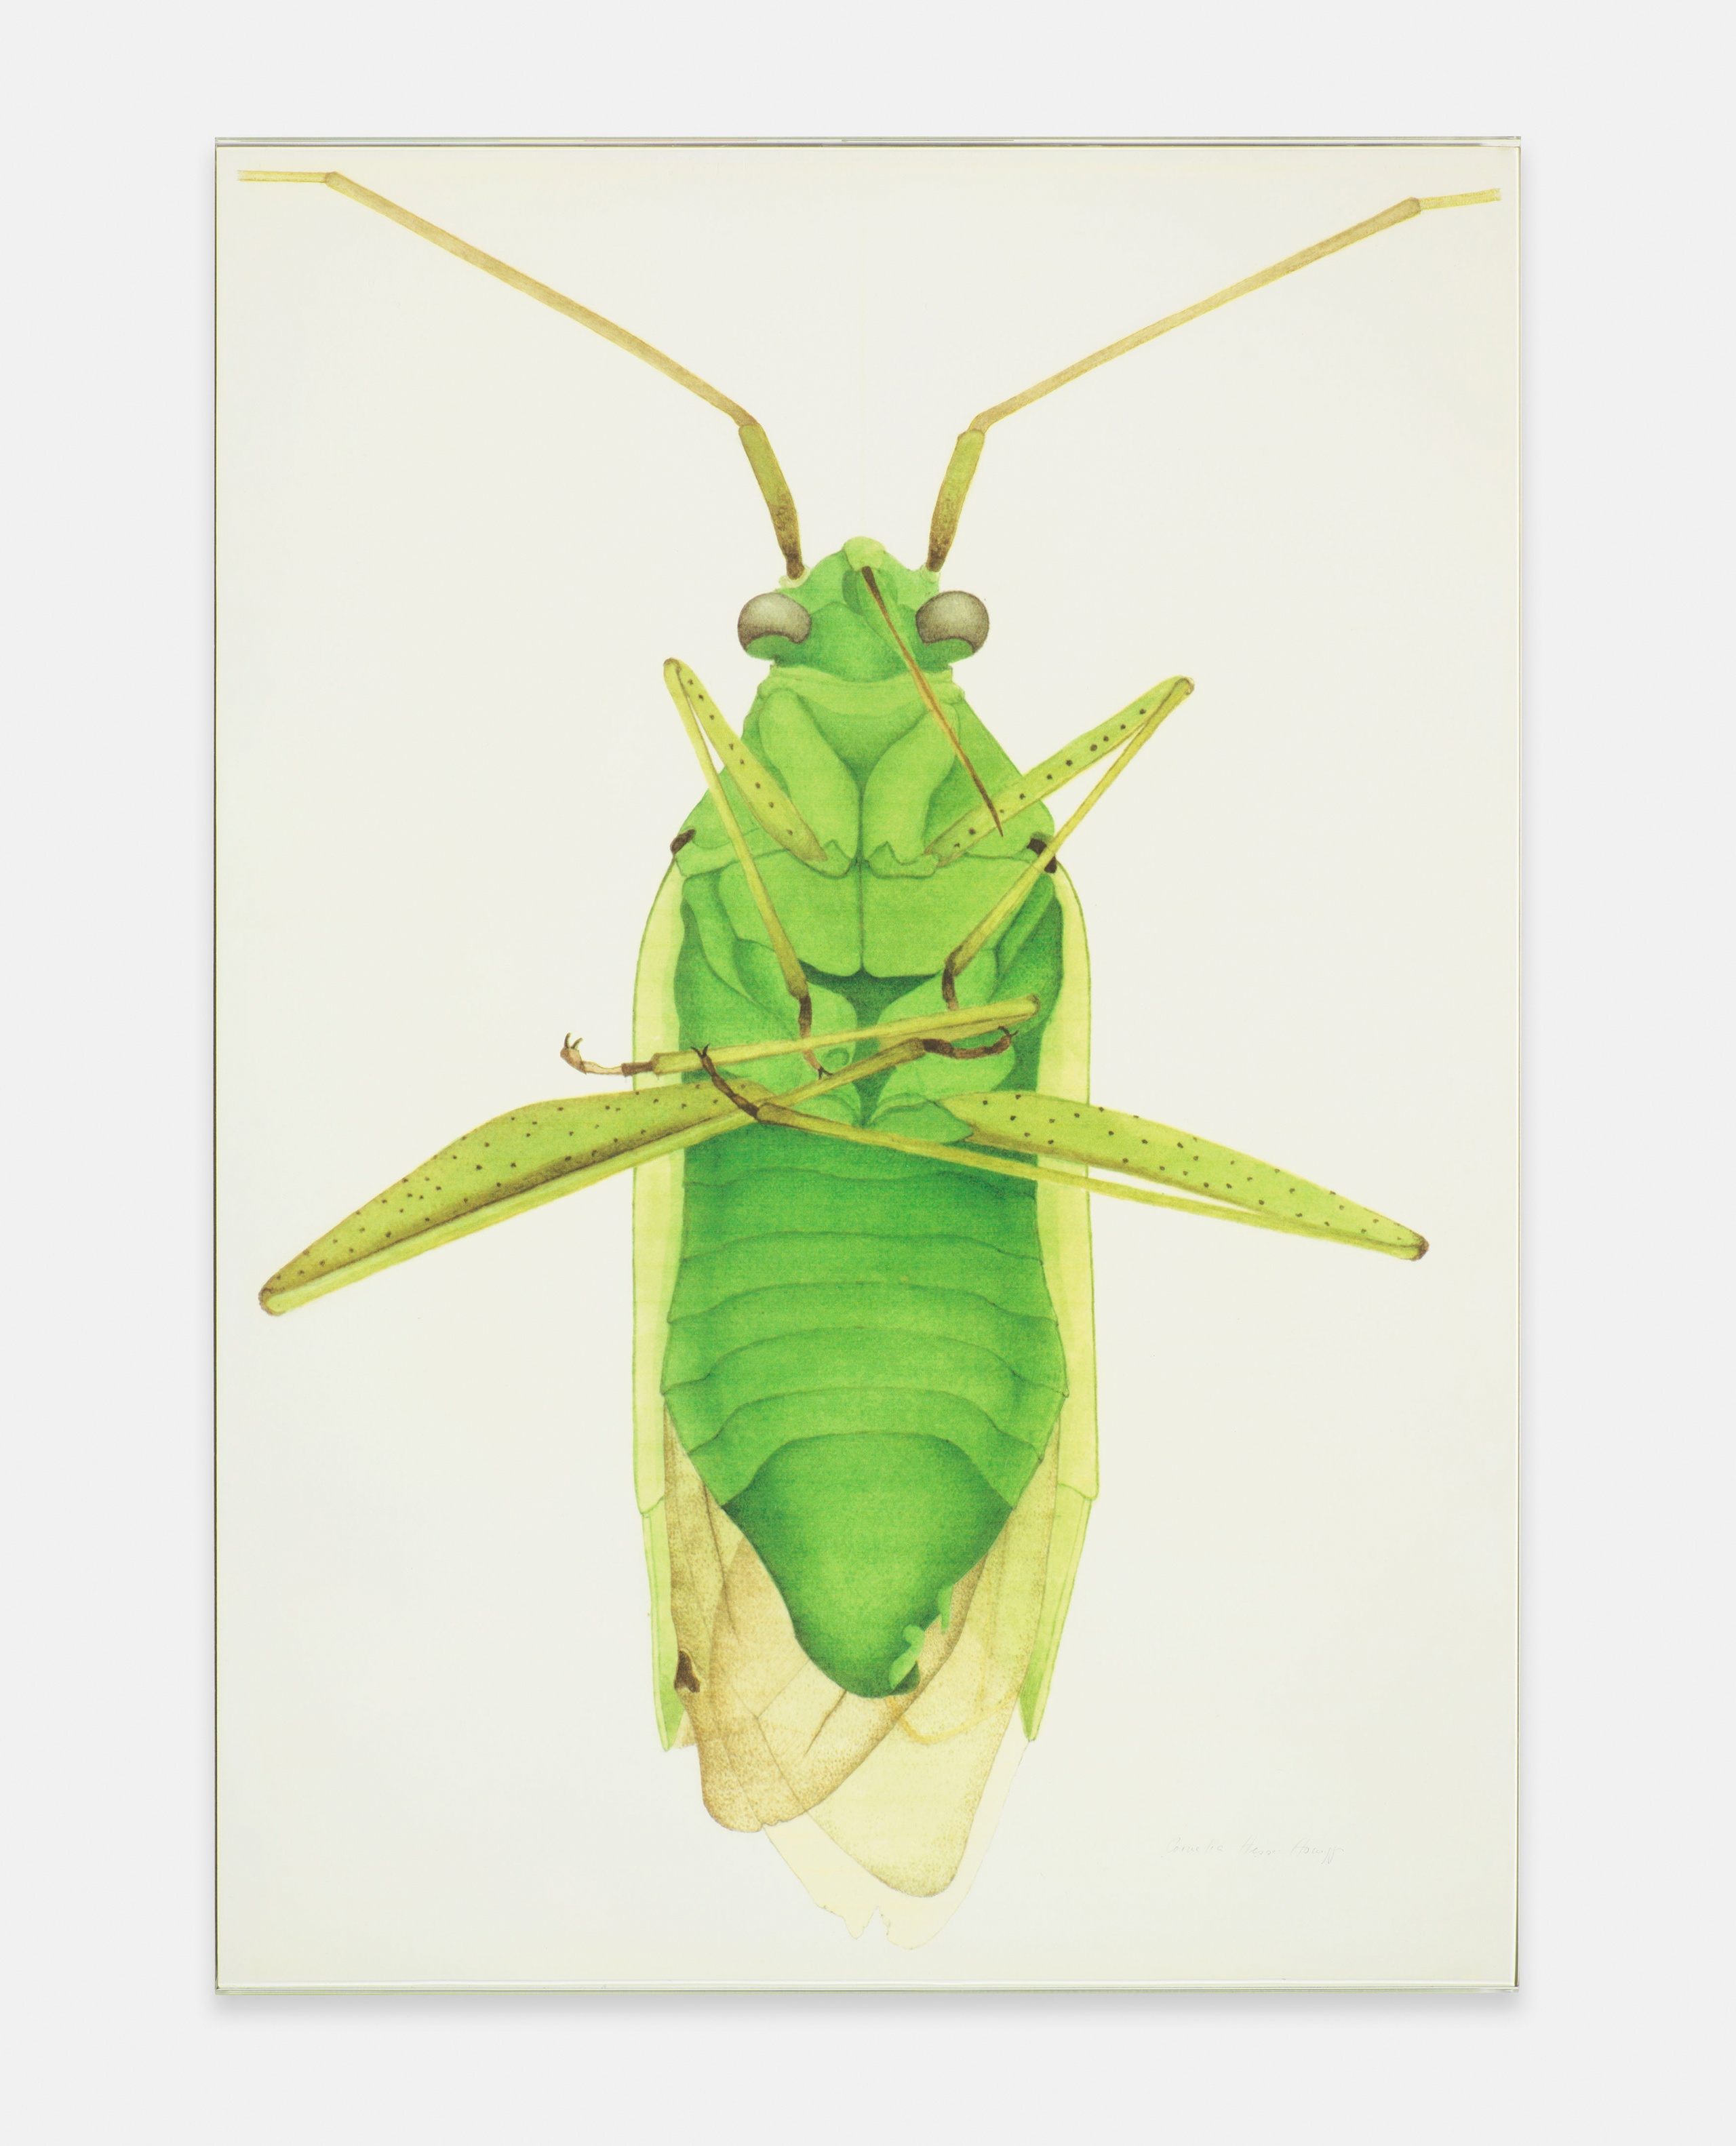 Cornelia Hesse-HoneggerSoft bug (Miridae) from Ponsonby, Great Britain, from the vicinity of the Sellafield nuclear processing plant, Great Britain, 1989/92archival inkjet print85 x 59.5 cm | 33 1/2 x 23 1/2 in